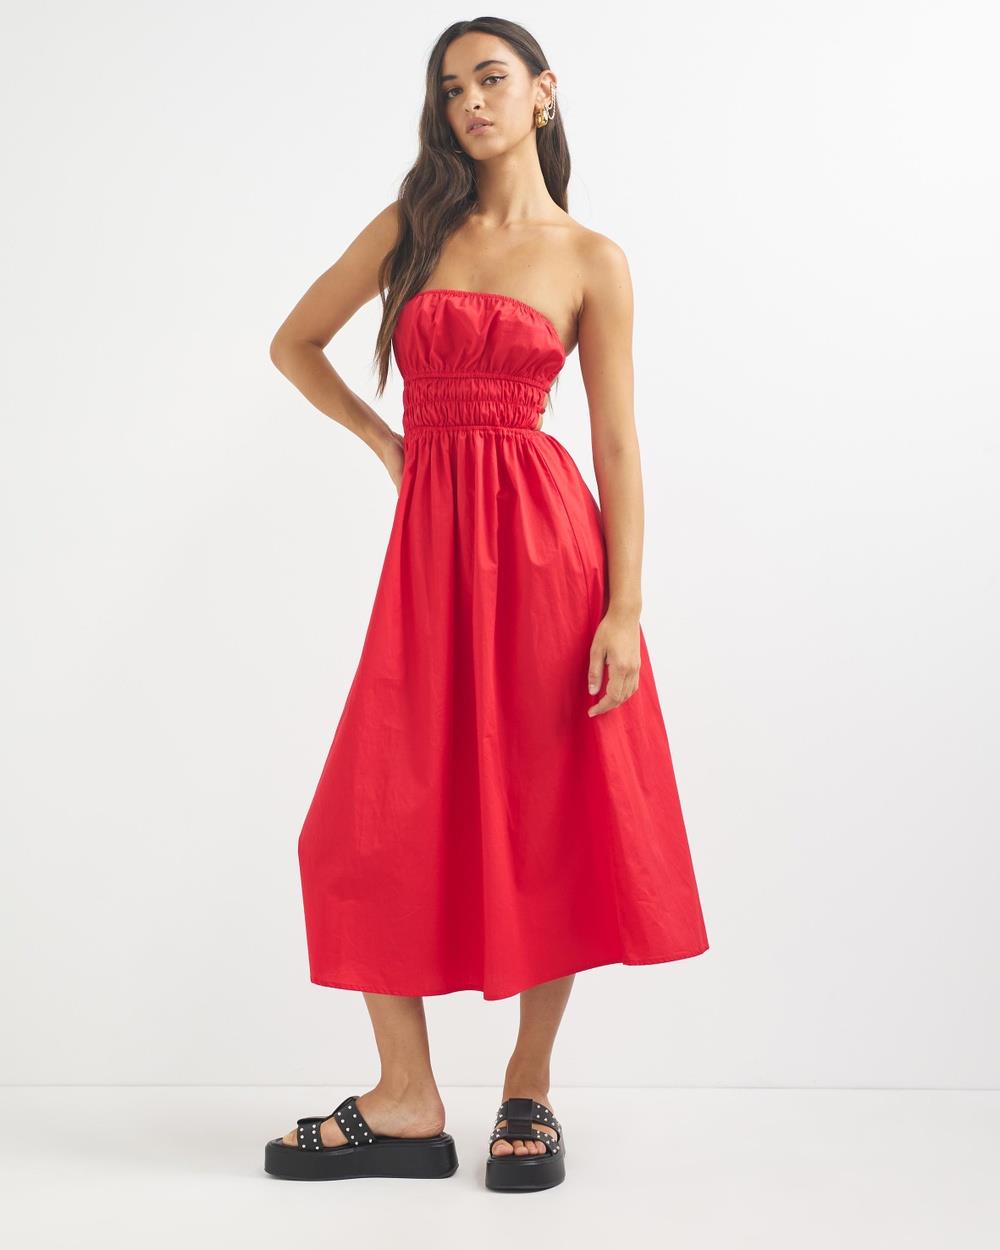 Dazie - Going Places Strapless Dress - Dresses (Red) Going Places Strapless Dress